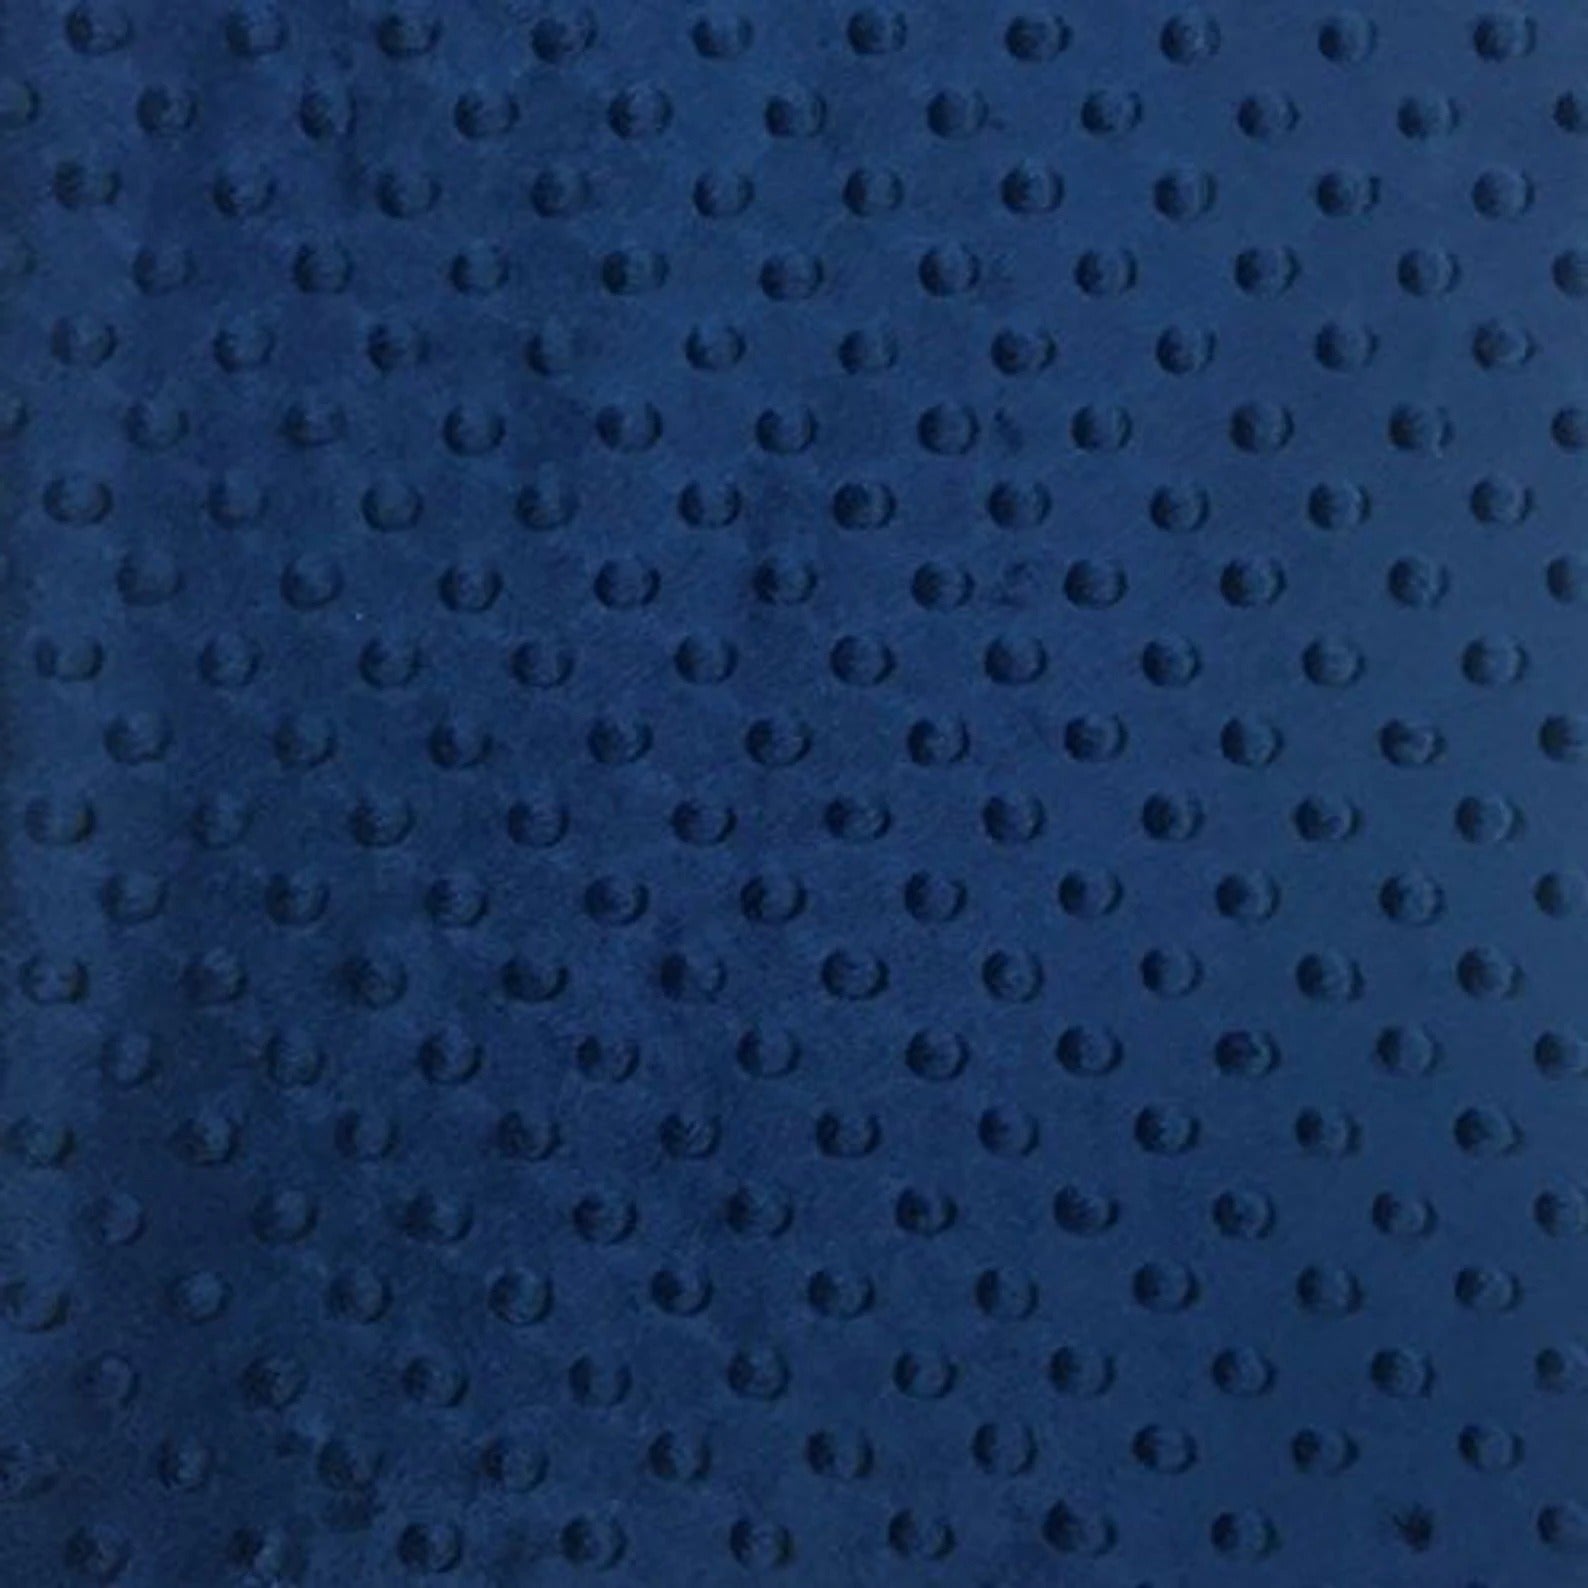 Dimple Dot Minky Fabric Sold By The Yard - 36"/ 58" Navy Blue